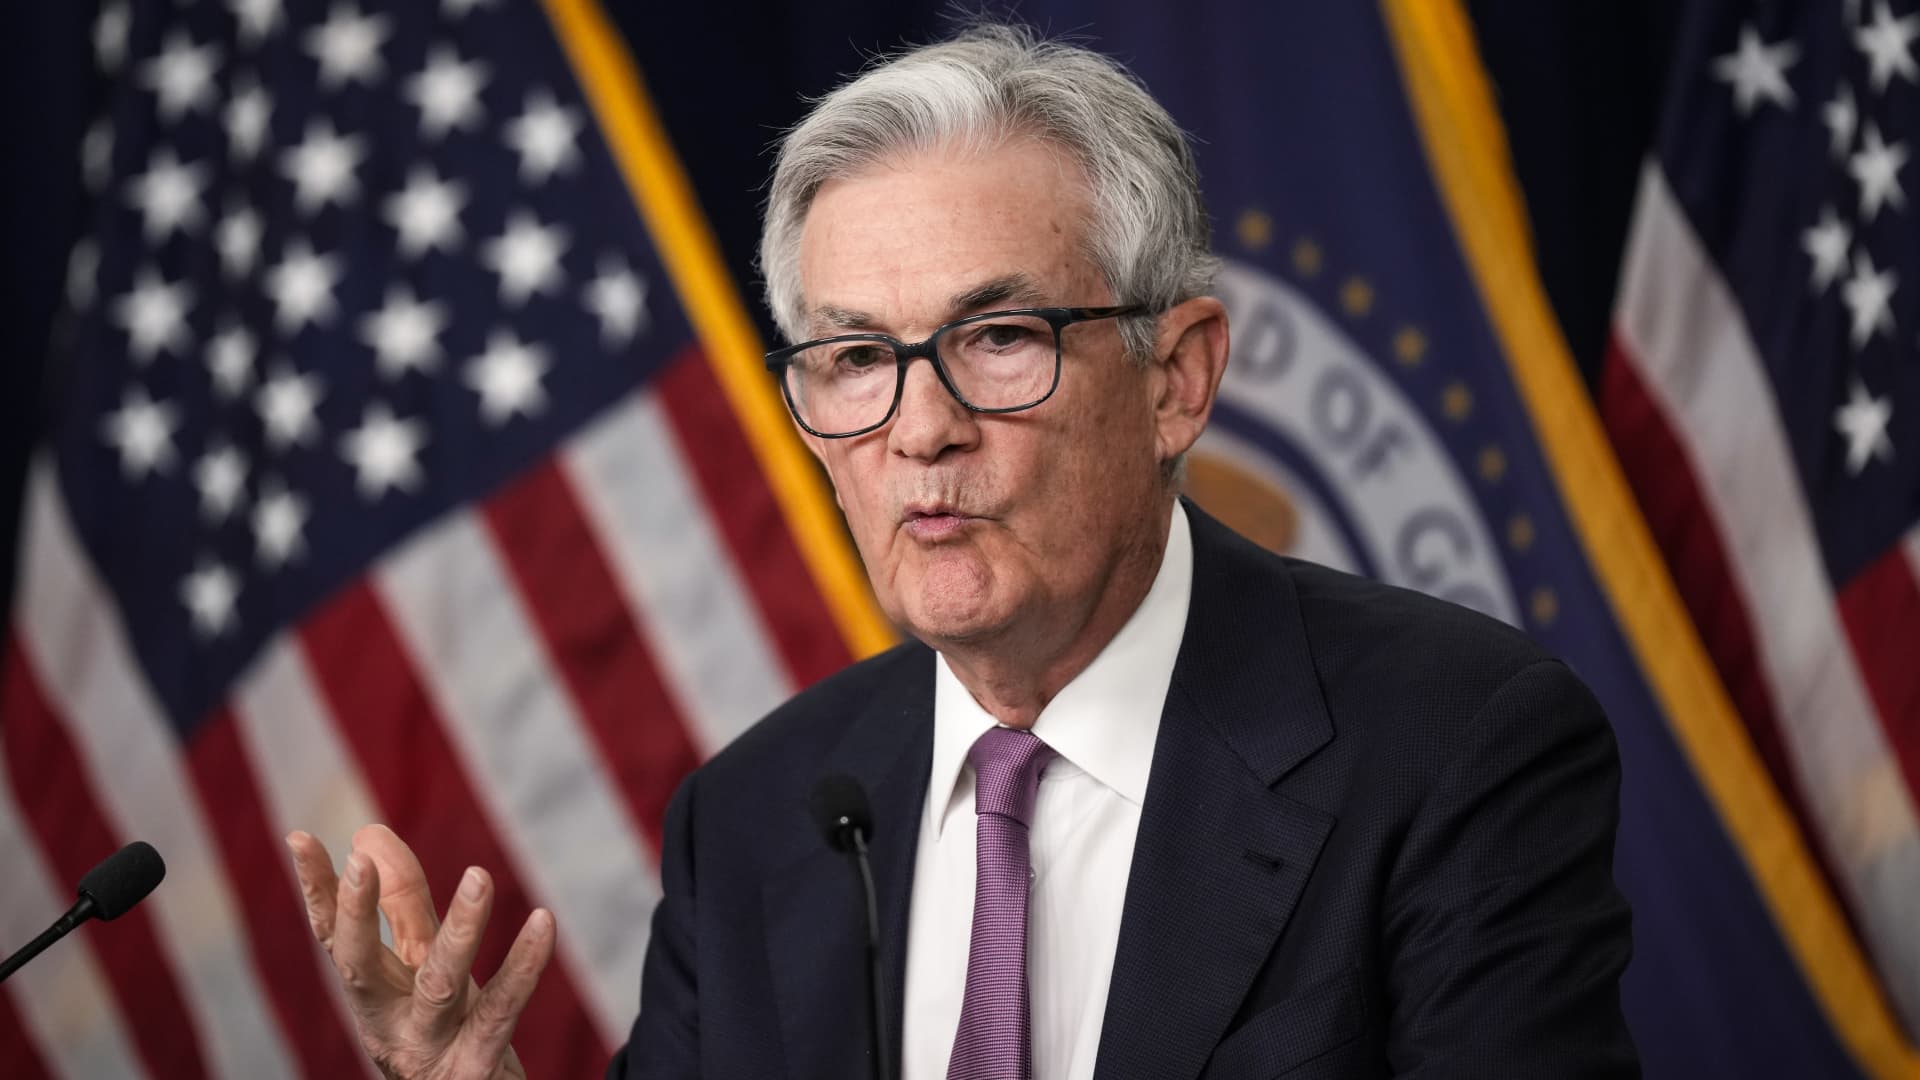 Fed approves hike that takes interest rates to highest level in more than 22 years